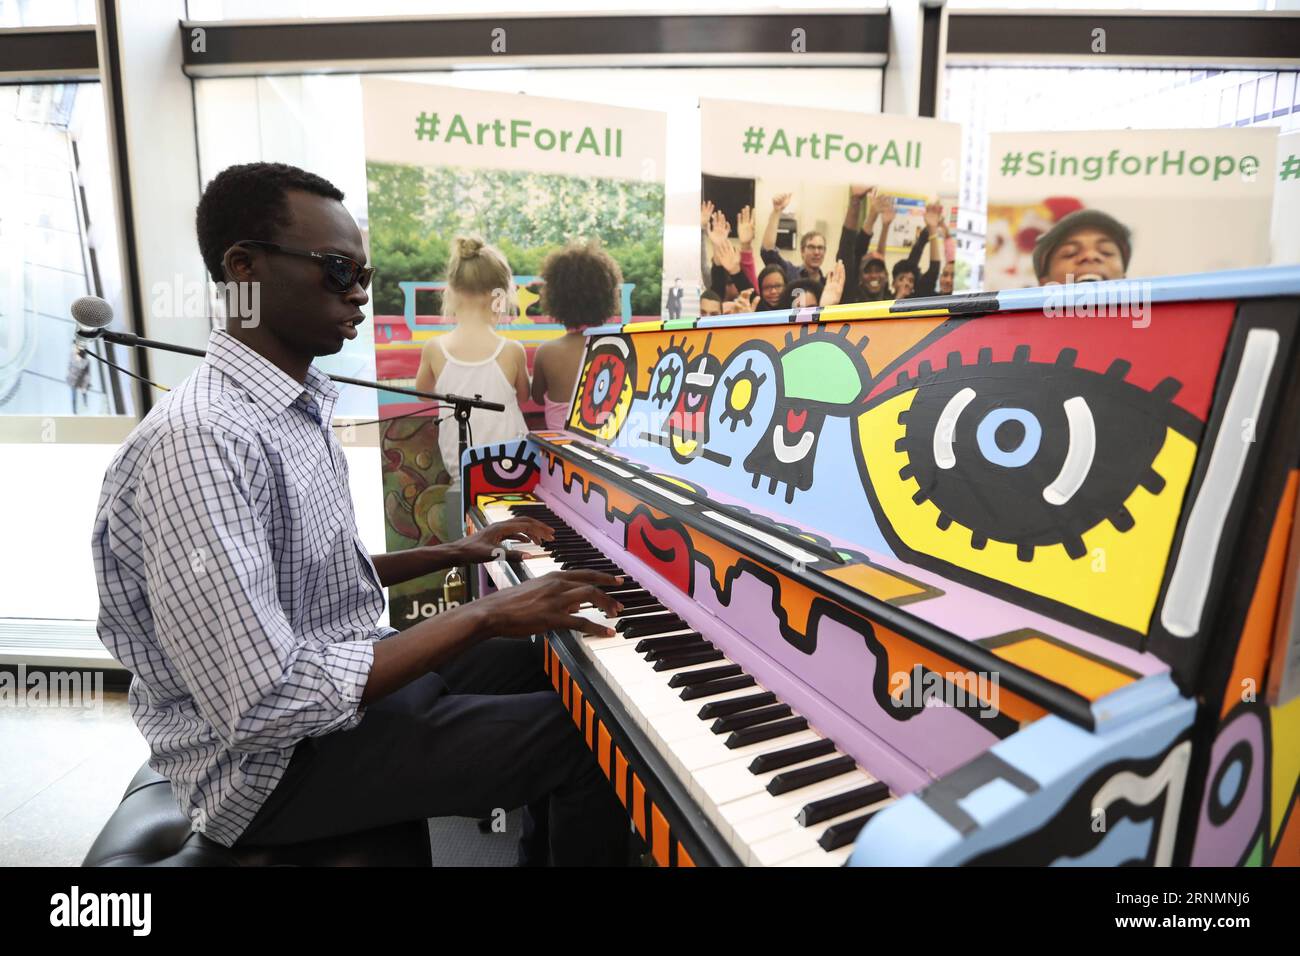 (170605) -- NEW YORK, June 5, 2017 -- Keer Deng, a visually disabled hobbyist, plays the piano during the opening event of Sing for Hope Pianos in New York, the United States, on June 5, 2017. Sing for Hope Pianos, an annual public arts project in New York, kicked off here on Monday. From June 5 to June 25, as a celebration of the work Sing for Hope does in communities year-round, 60 Sing for Hope Pianos will be placed in parks and public spaces in high traffic locations across all five boroughs in New York for everyone to play. After the public installation concludes on June 25, 50 of the 201 Stock Photo